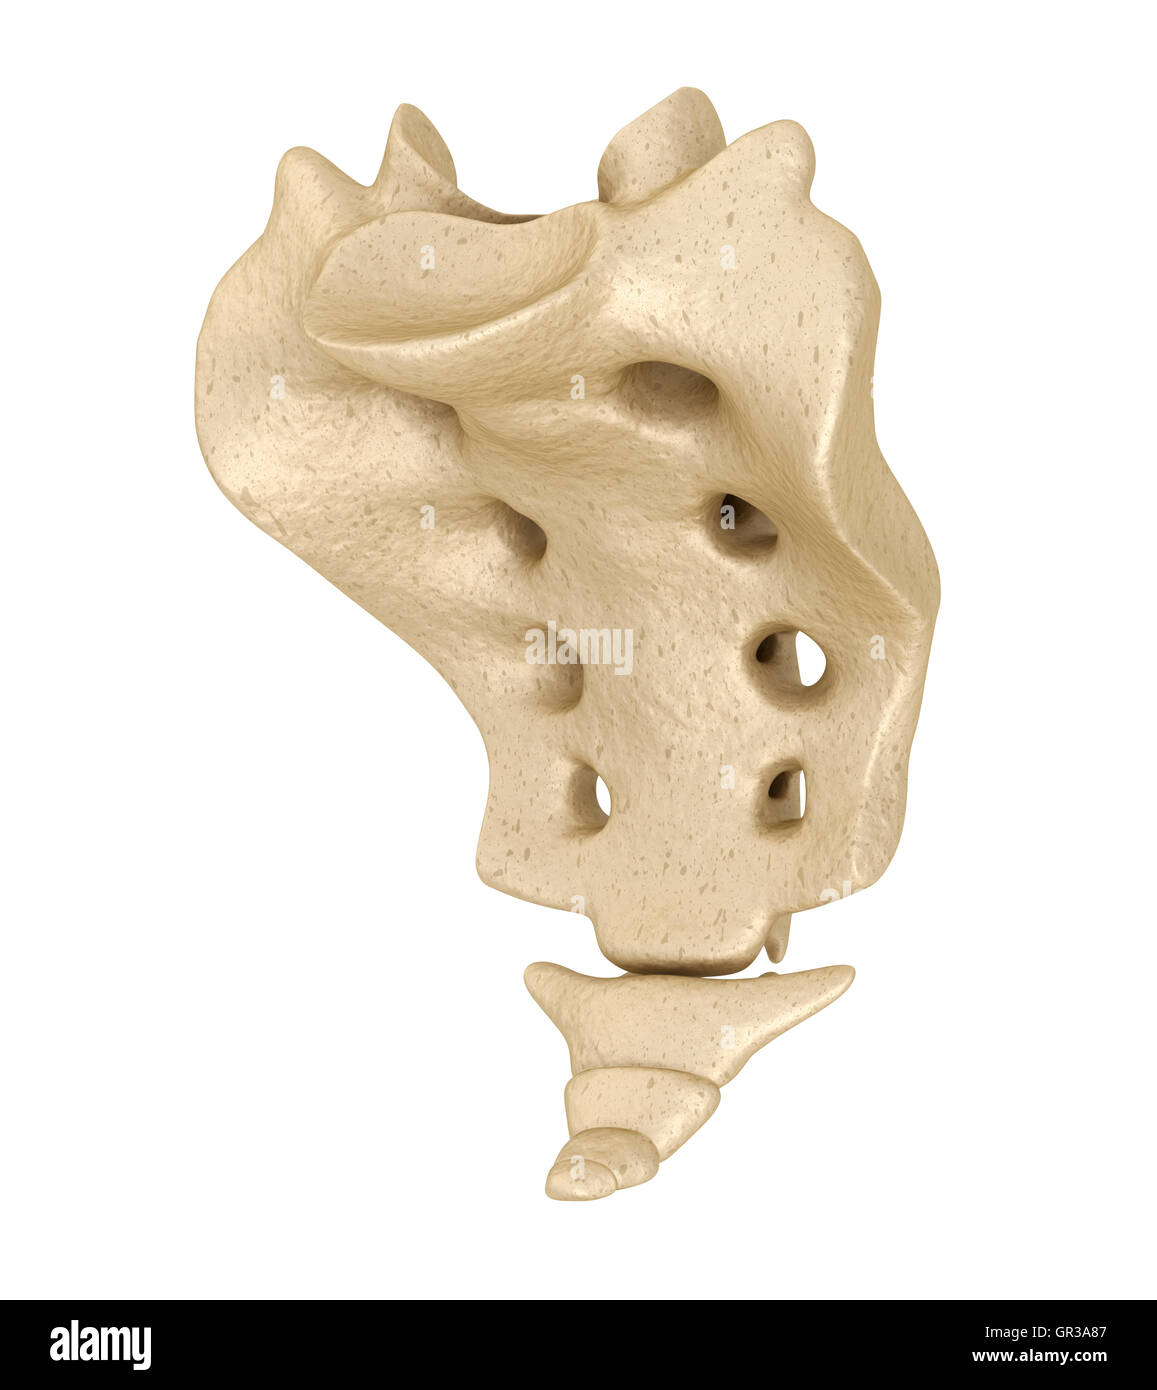 Sacrum : Medically accurate 3D illustration Stock Photo